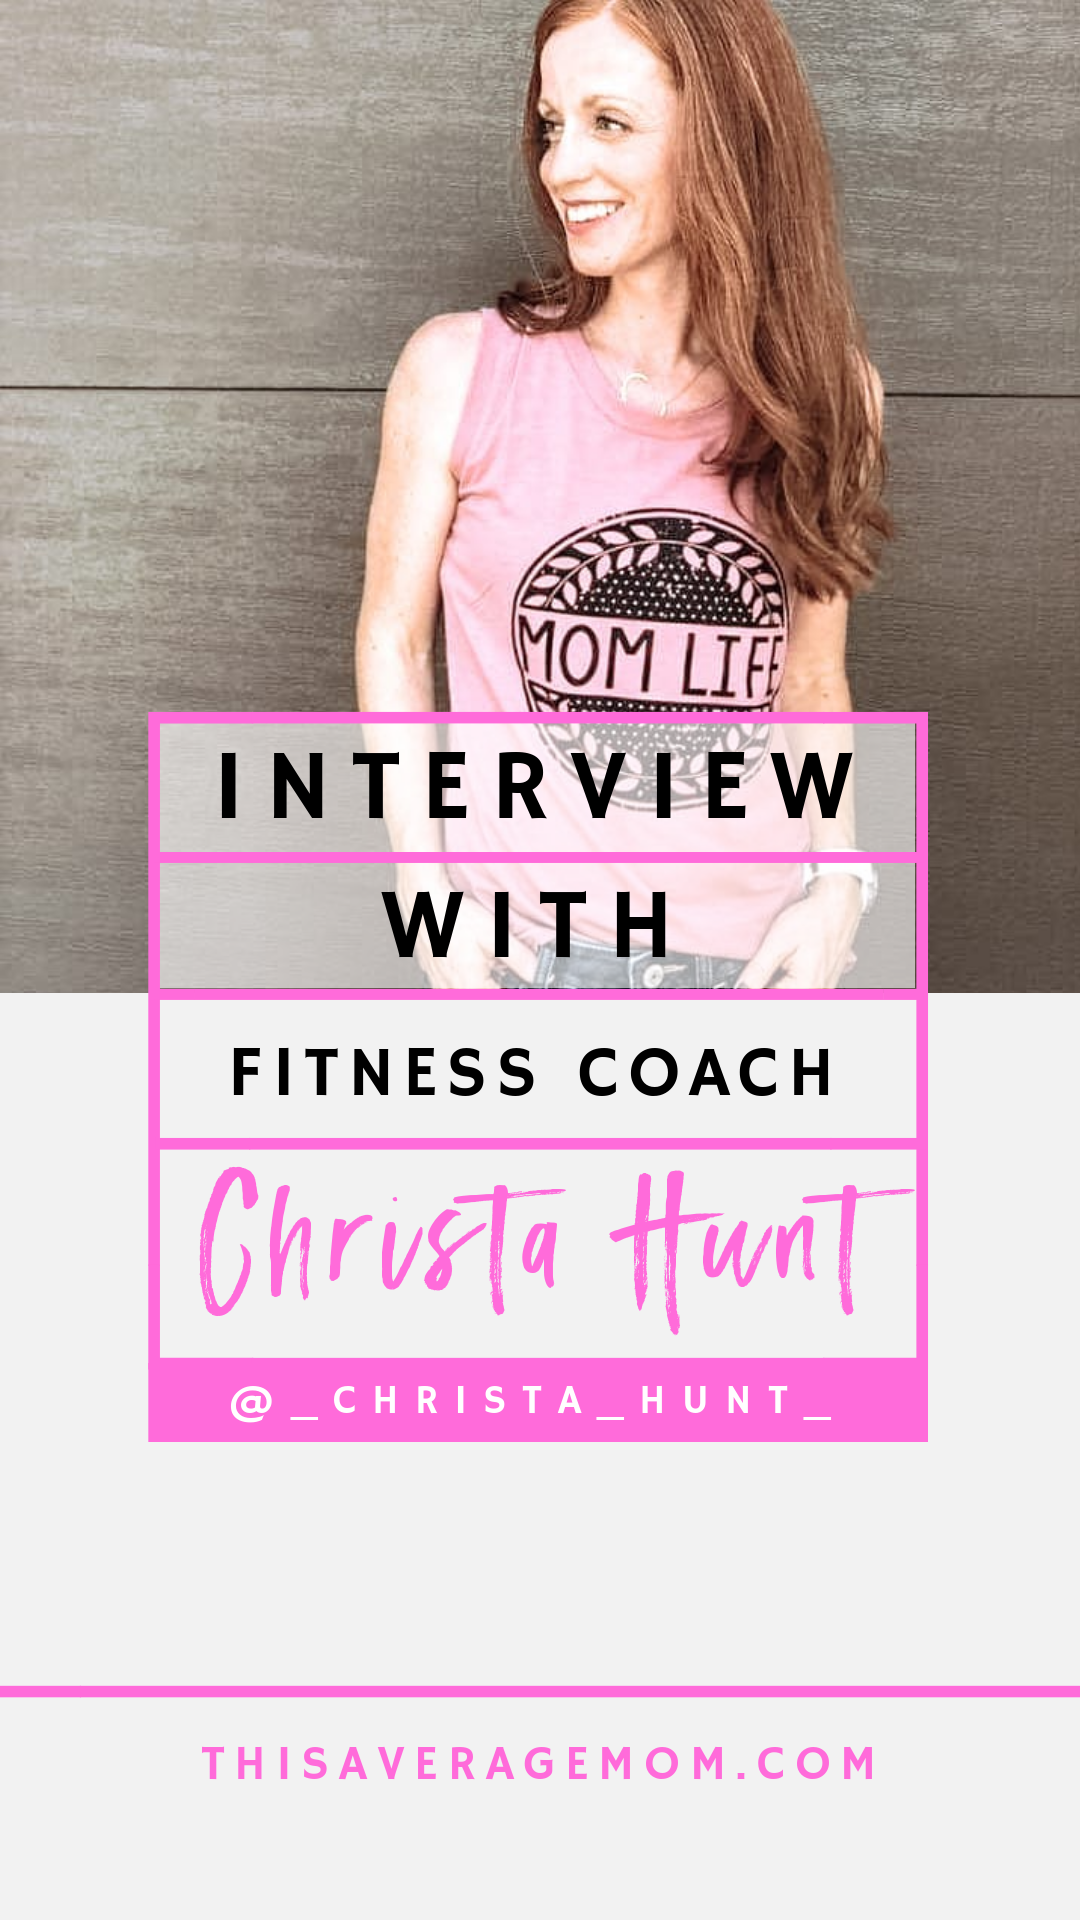 Do you struggle with fitness, exercise, motivation, or nutrition? You need these words of wisdom! We’re getting all the tips and tricks from a fitness coach who has been coaching for four years. Check out this post and the podcast for tons of great info.